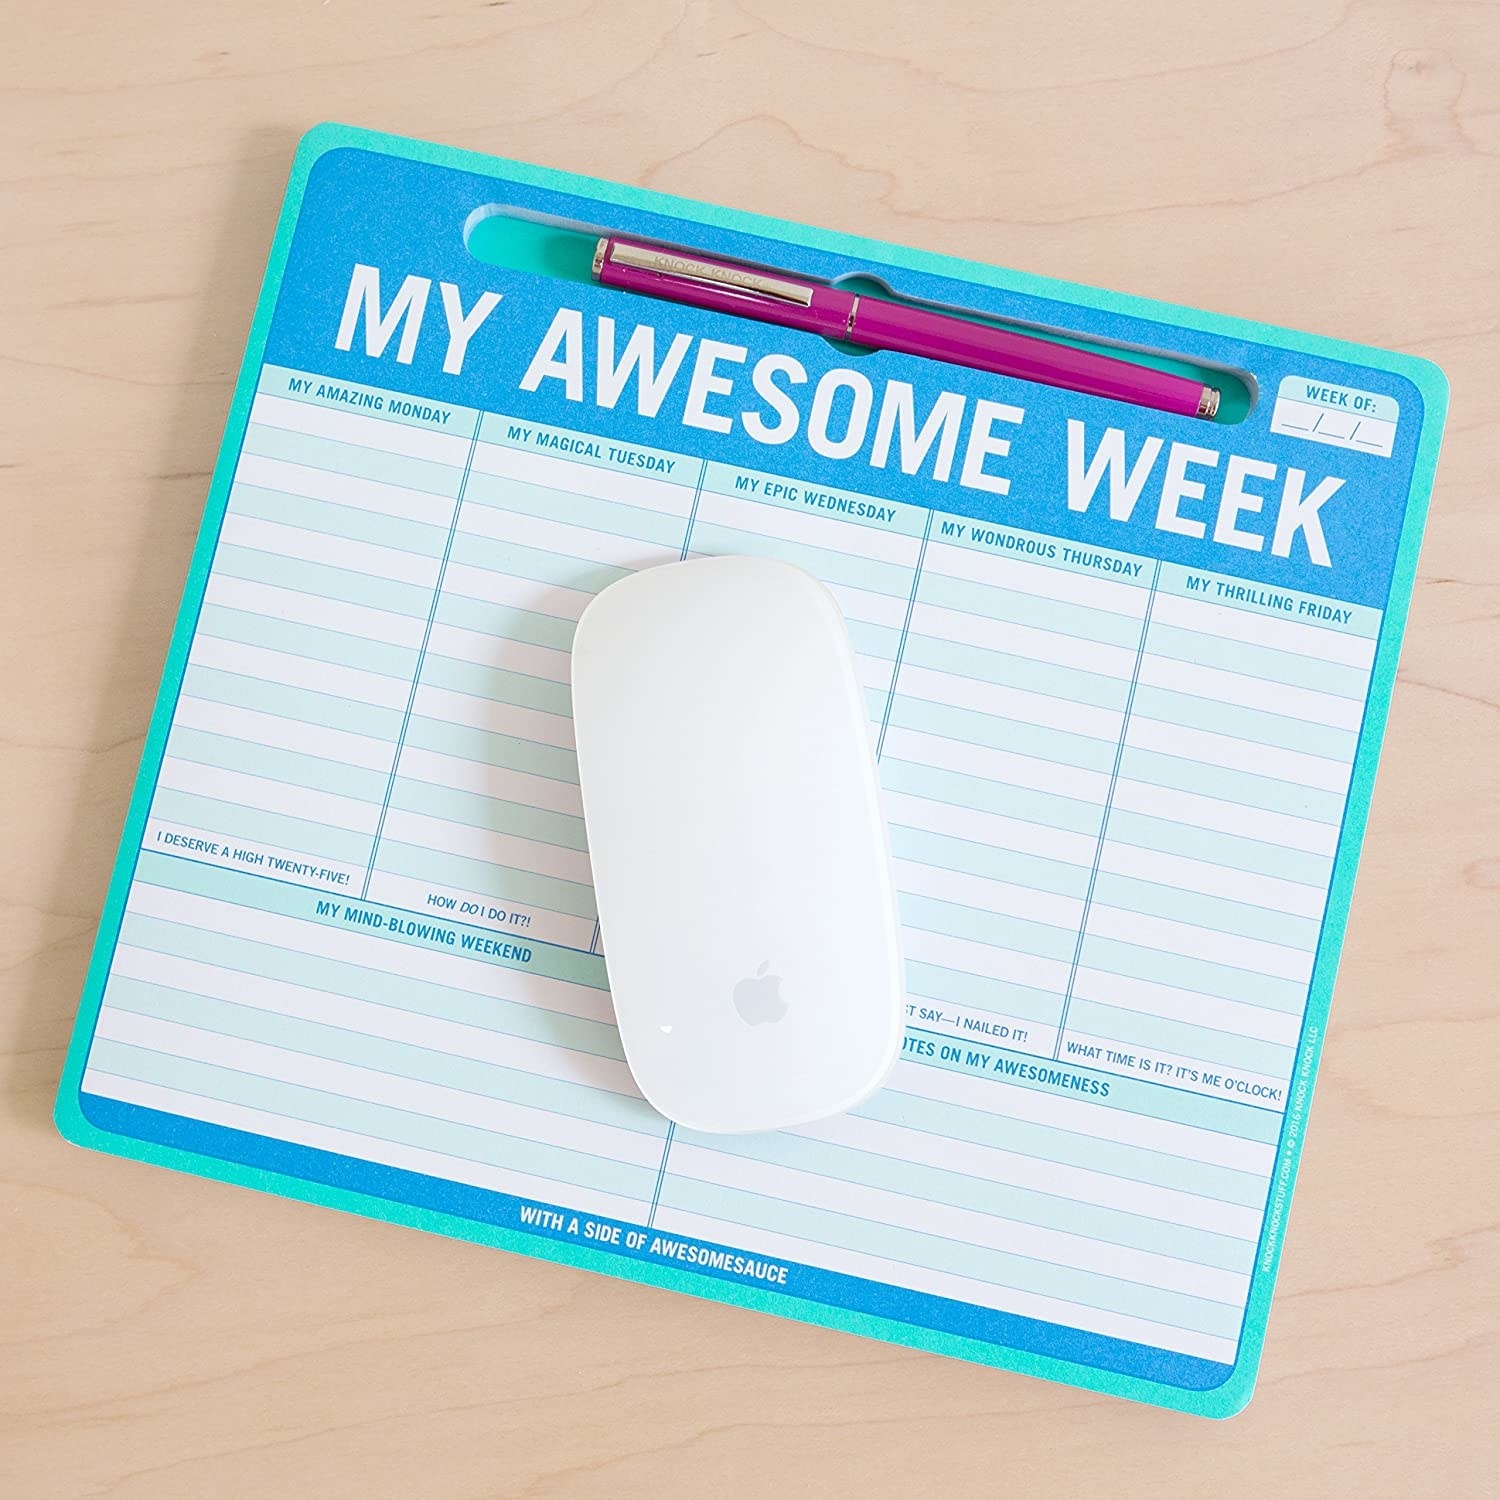 The mousepad on a desk with a mouse on it